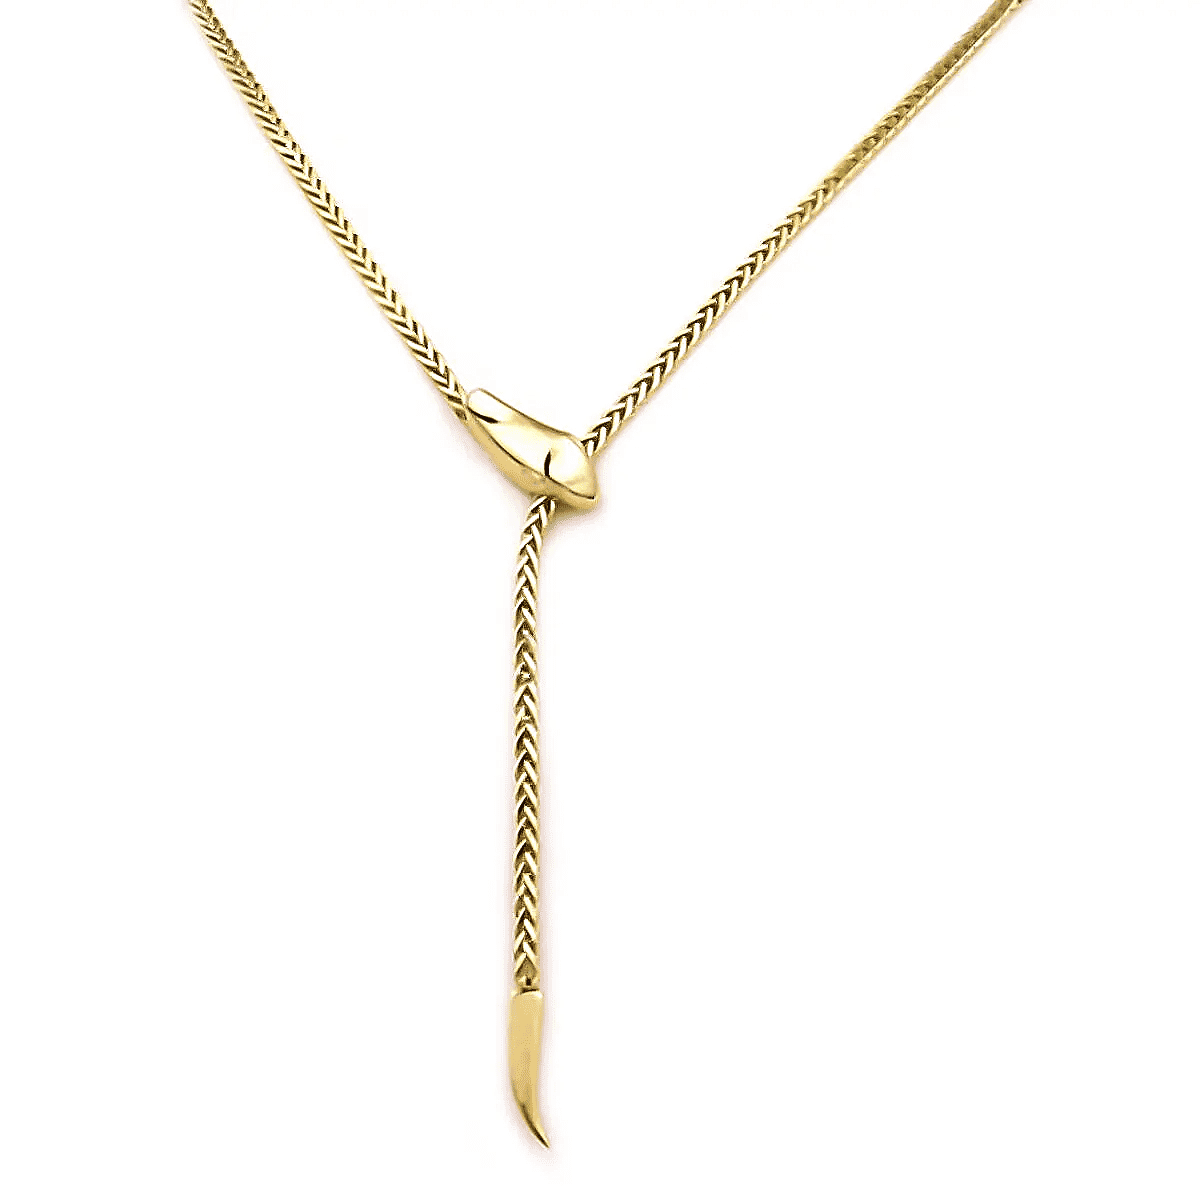 Vicenza Closeout - 9K Yellow Gold Spiga Serpent Necklace (Size - 22), Gold Wt 5.30 Gms